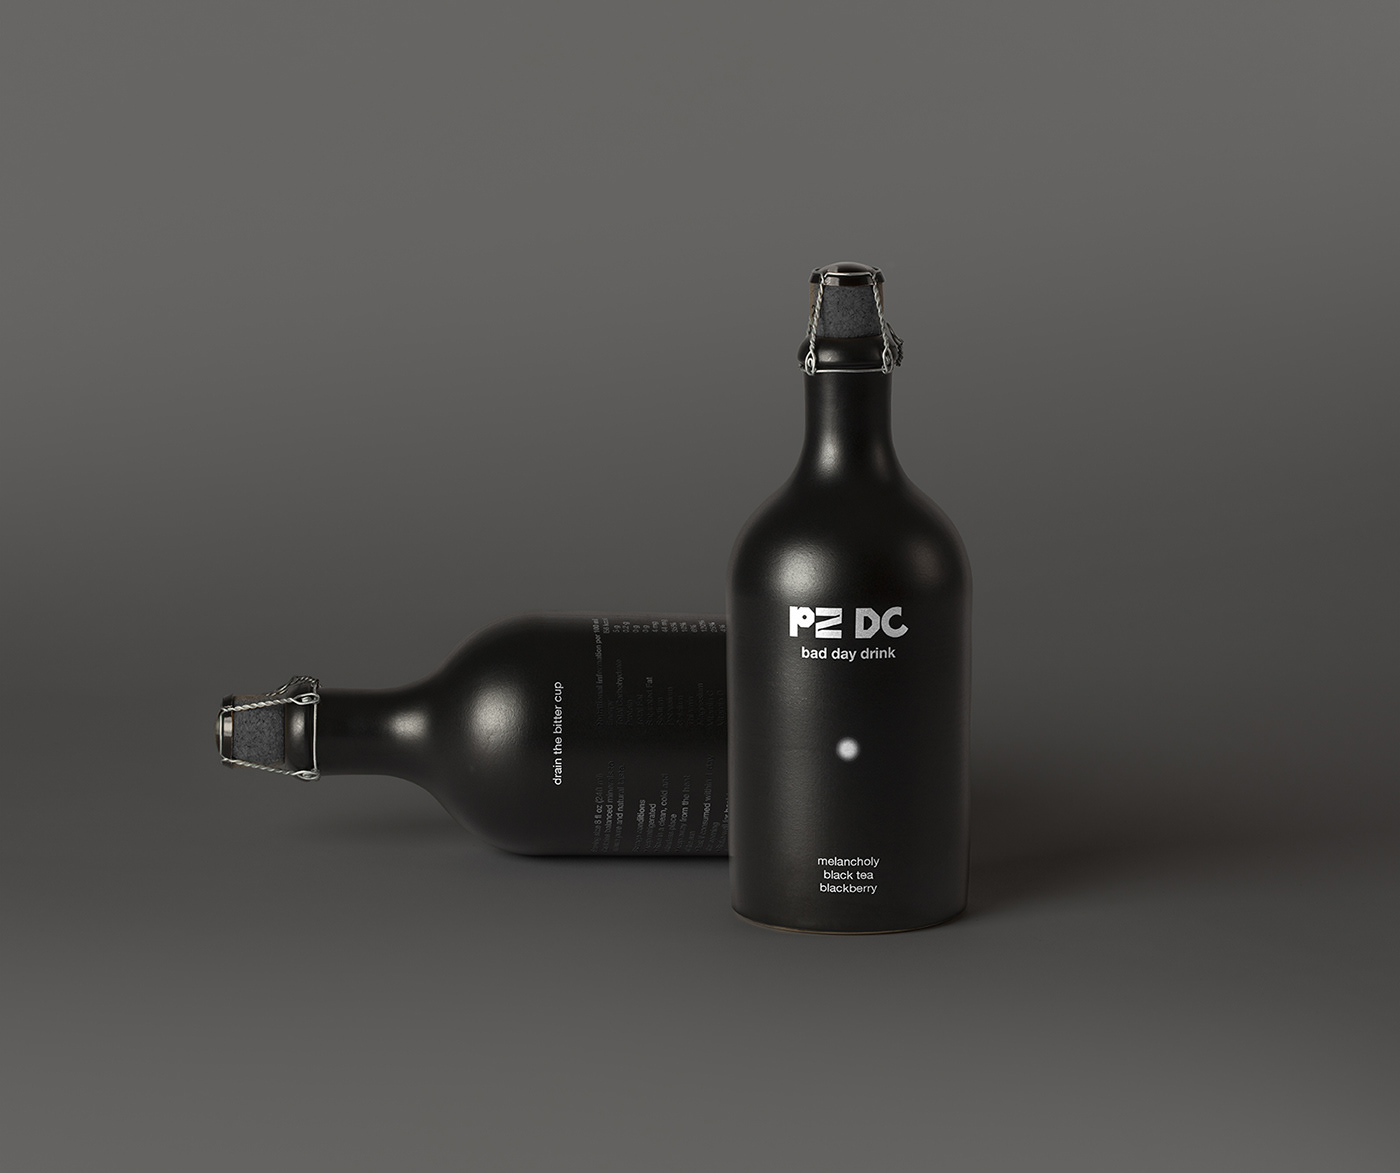 beverage black and white concept graphic design  Minimalism minimalist package design  Packaging packaging design Promotion